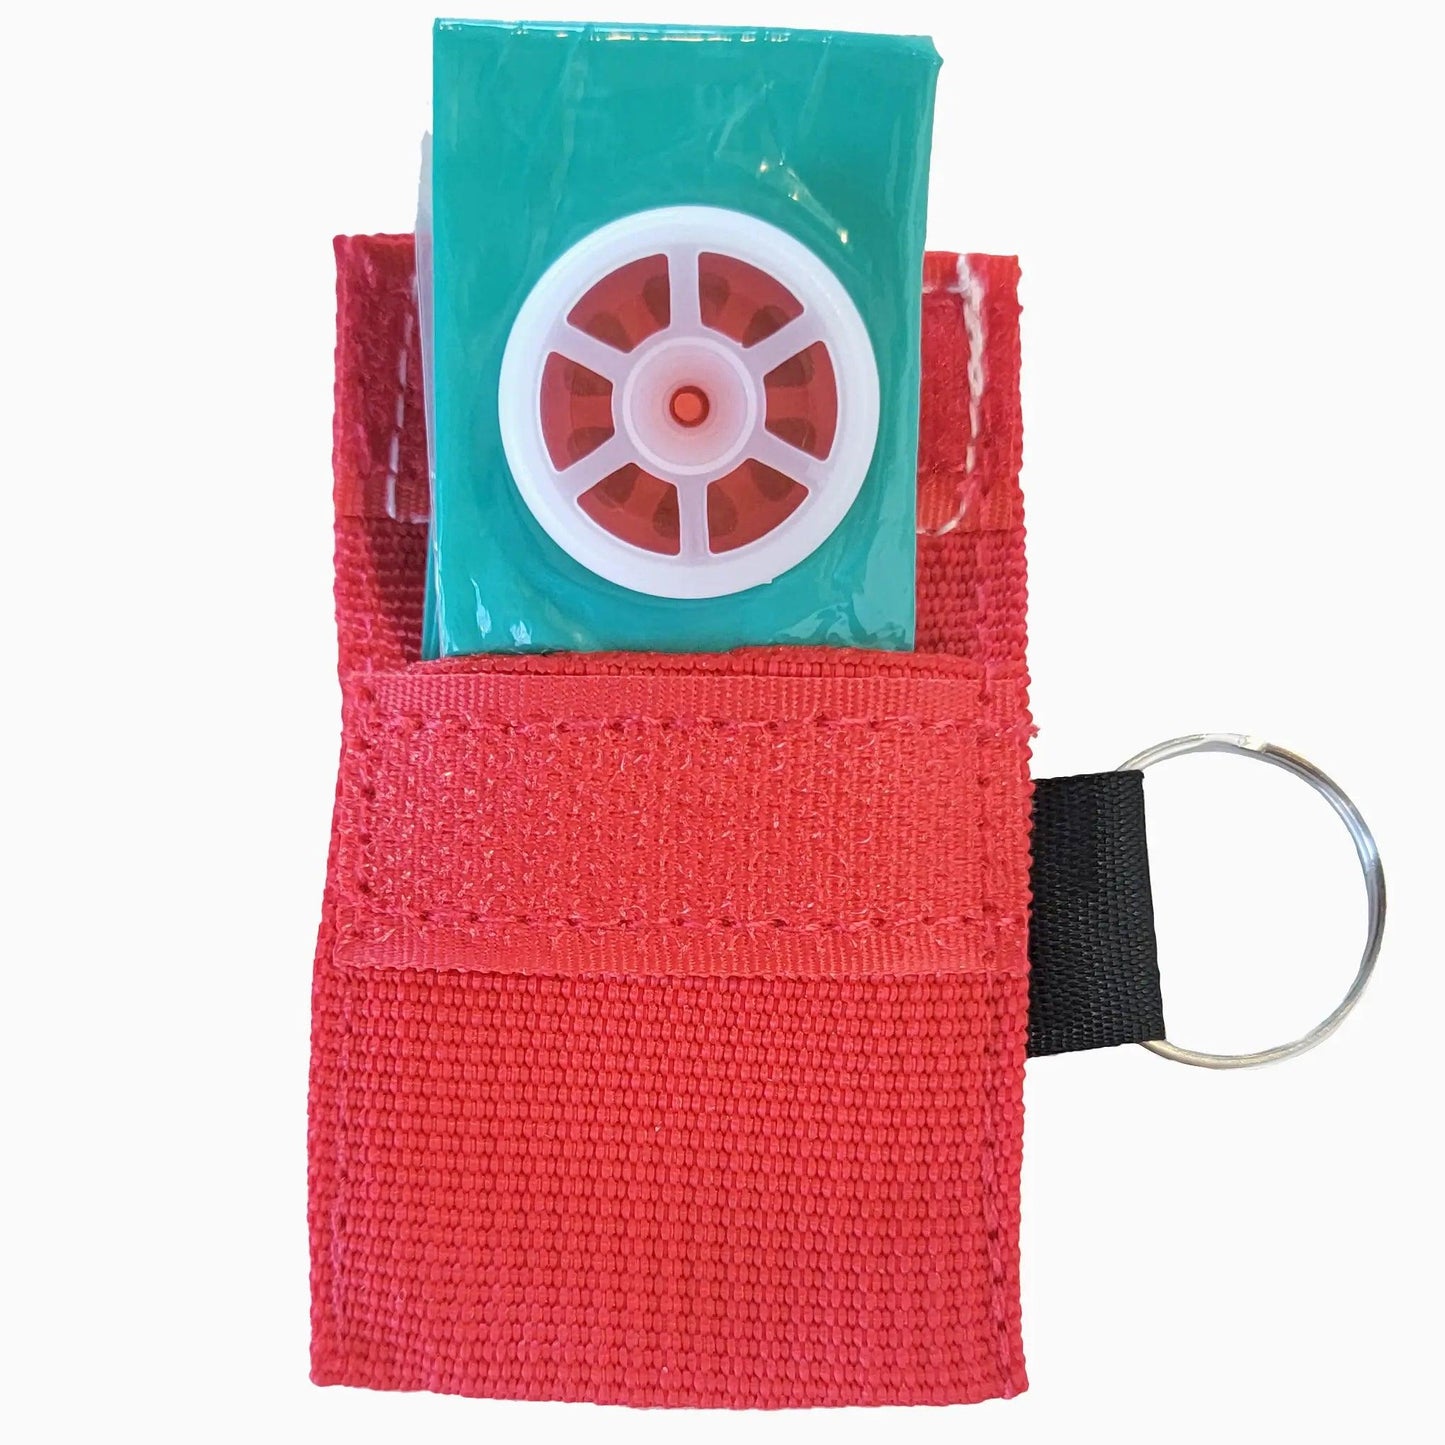 A CPR Face Shield red fabric keychain with First Aid Plus logo